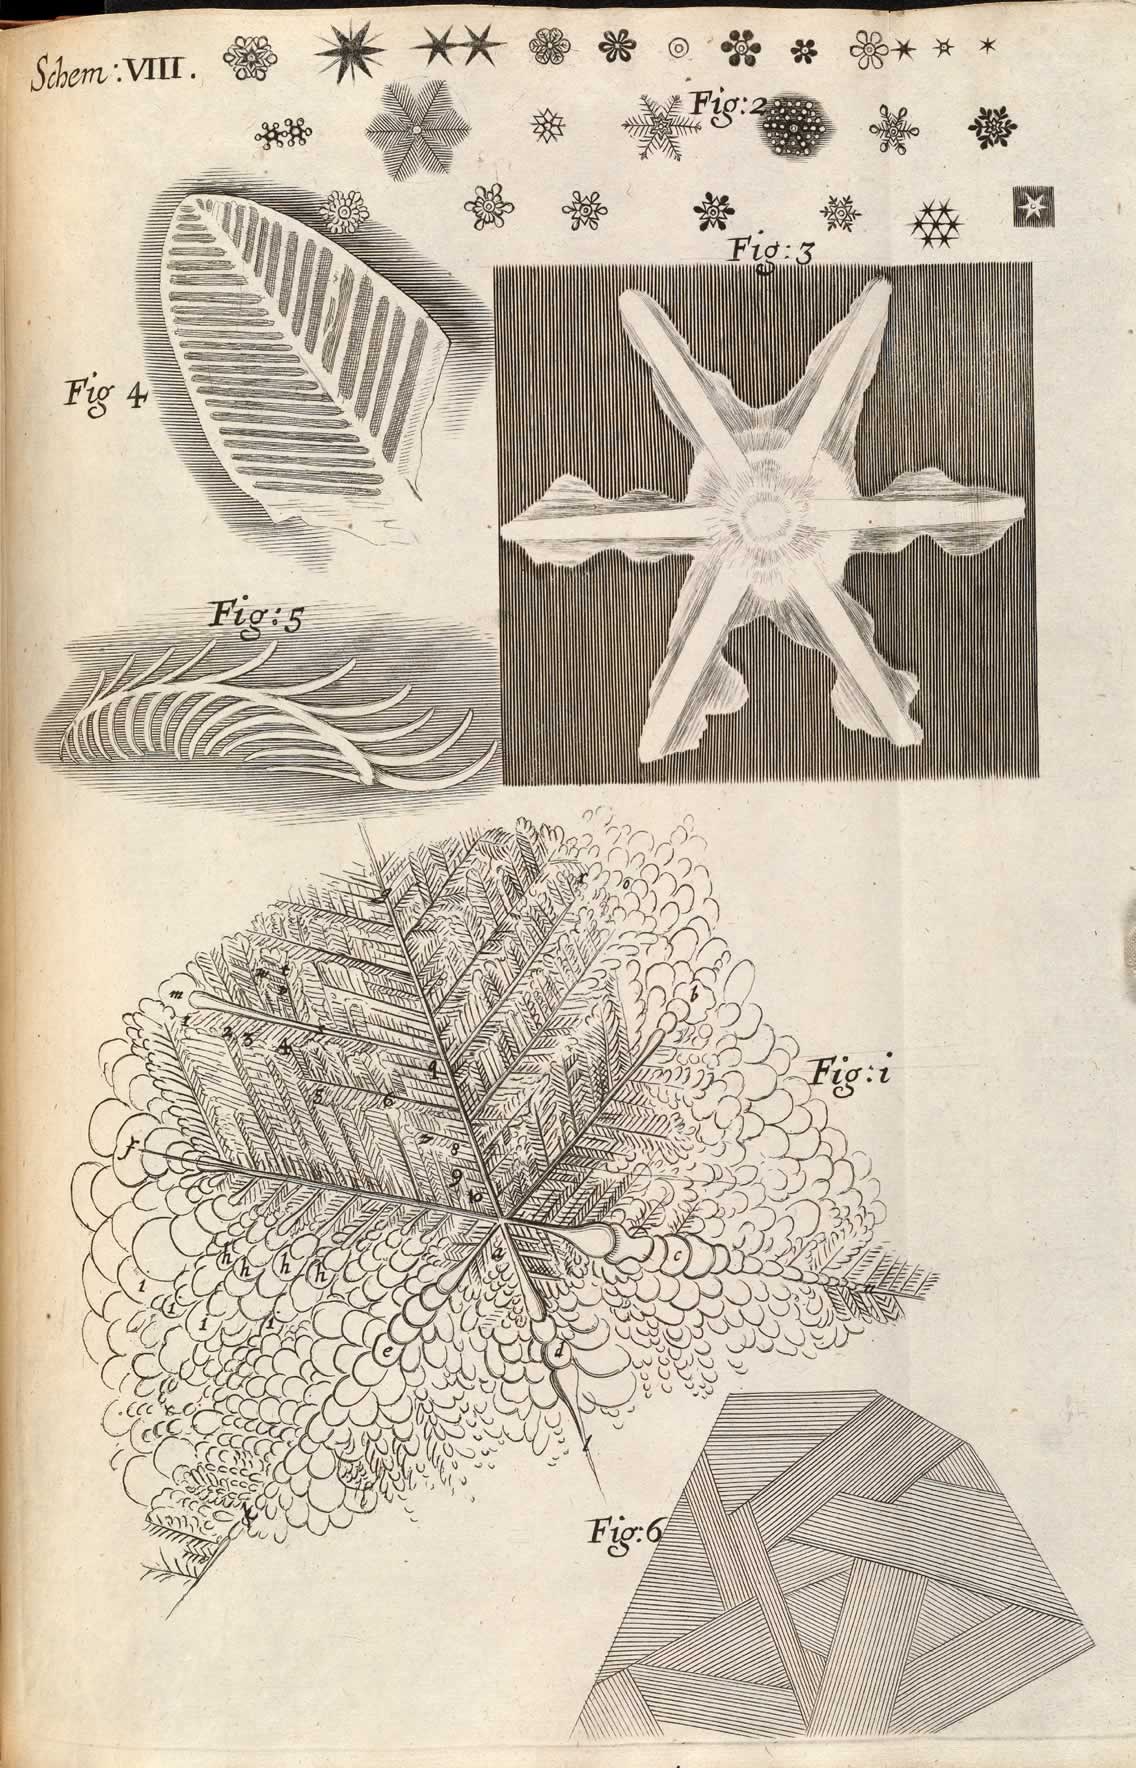 Image 3 from Micrographia by Robert Hooke.